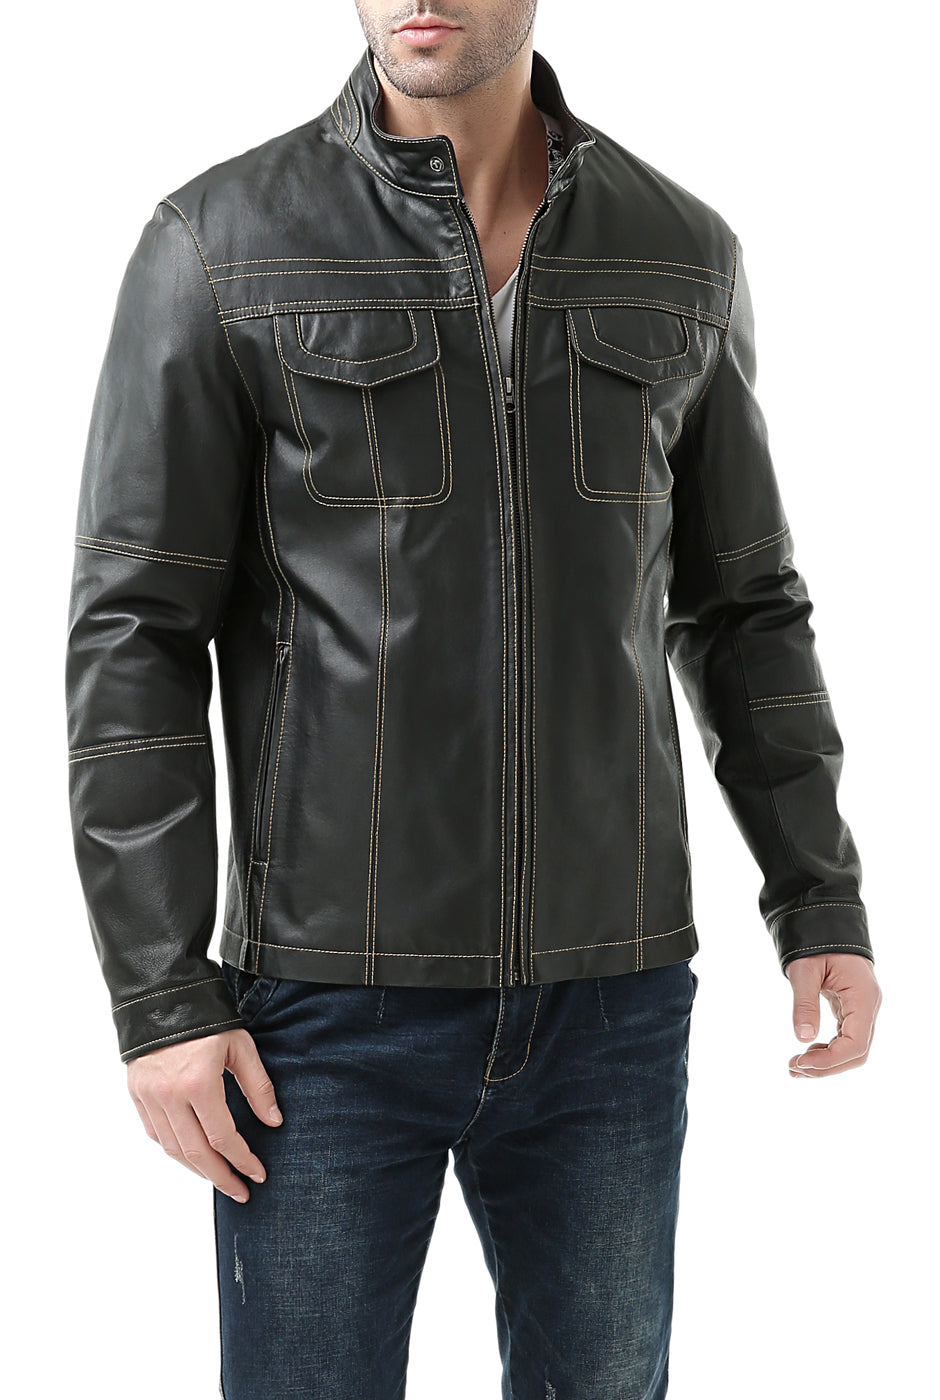 BGSD Monogram Collection Men Cowhide Leather Motorcycle Jacket